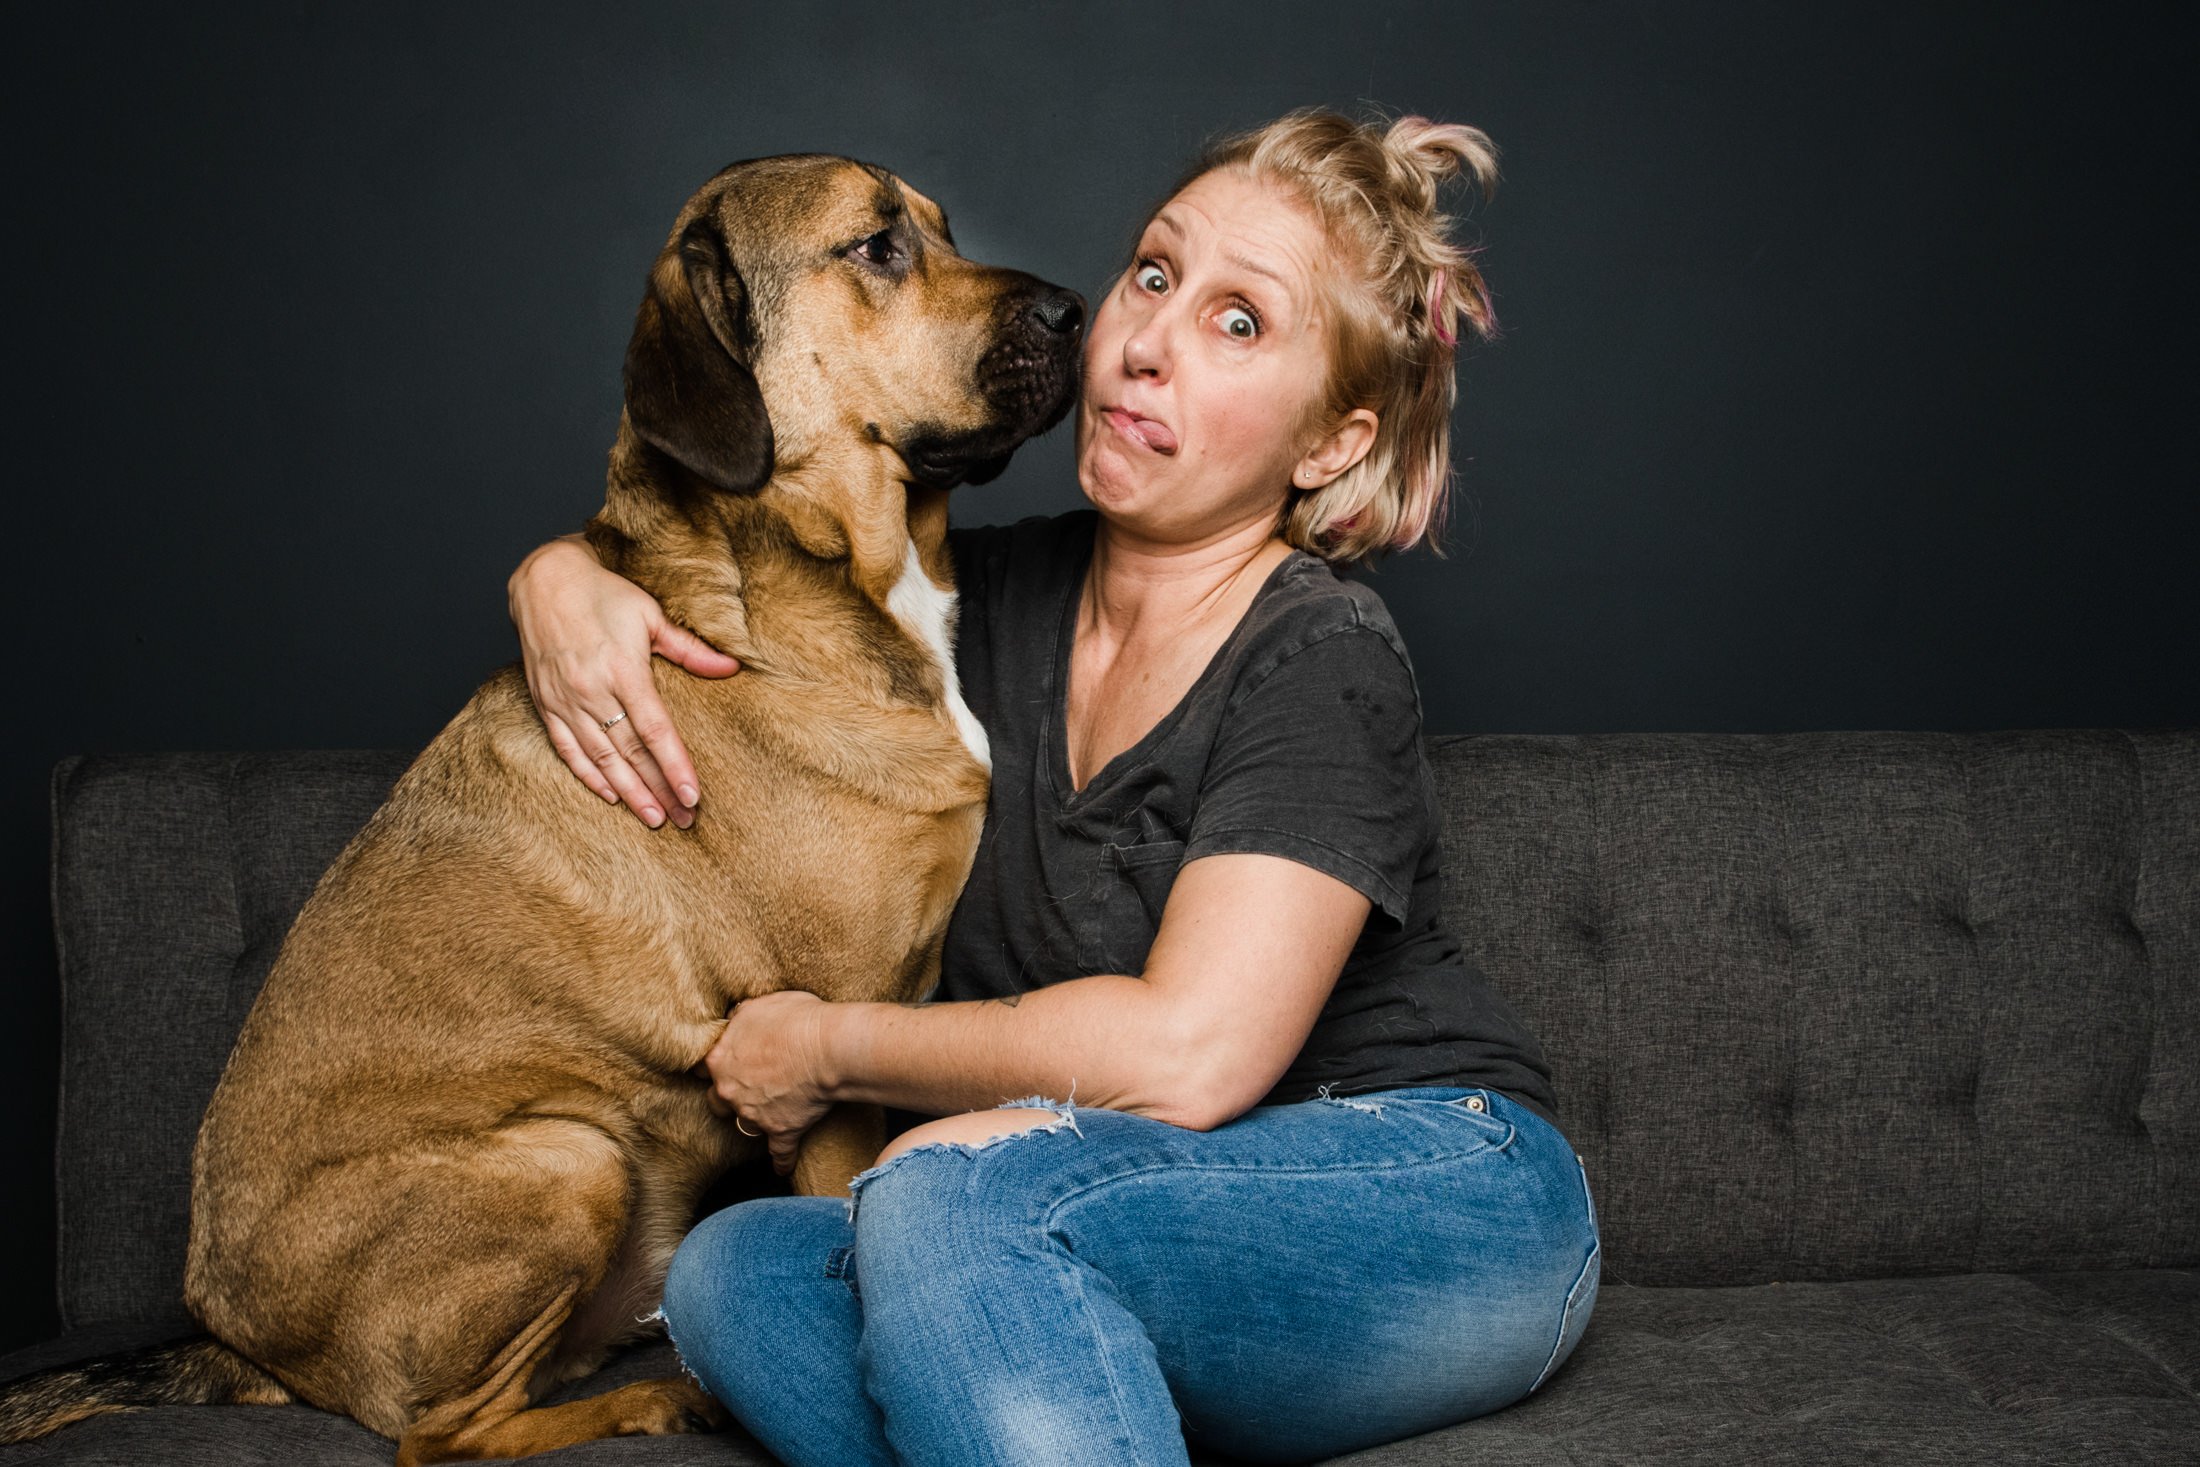 The fun Lehigh Valley pet photographer, Maggie, gets Slobbered by her dog!